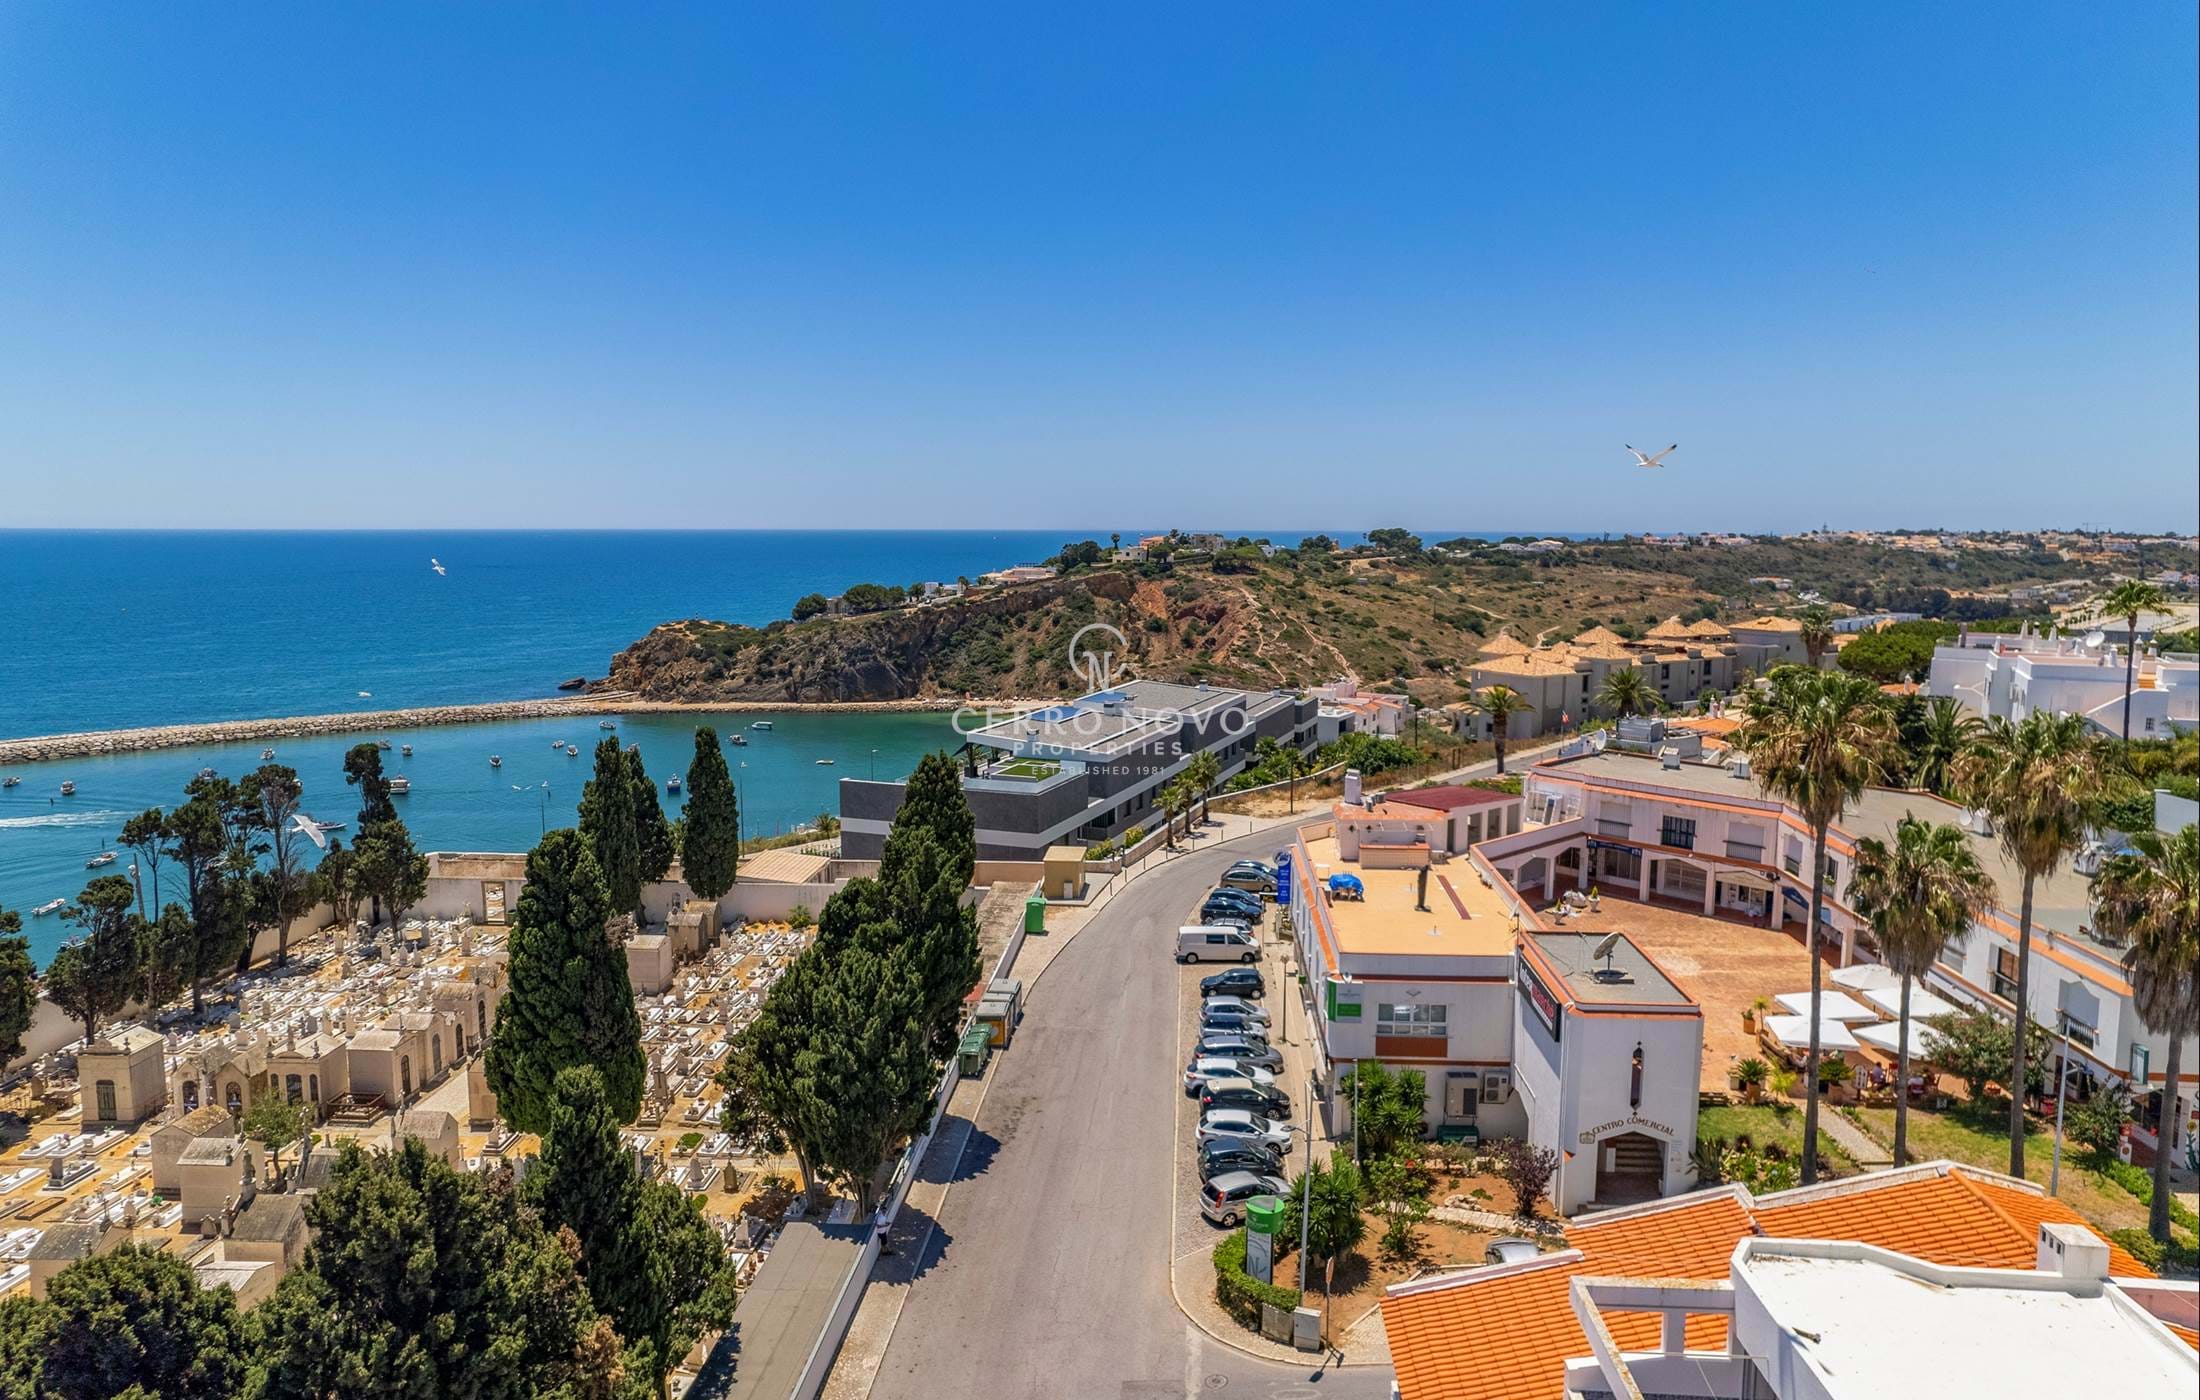 Spacious two-bedroom apartment with lovely sea views